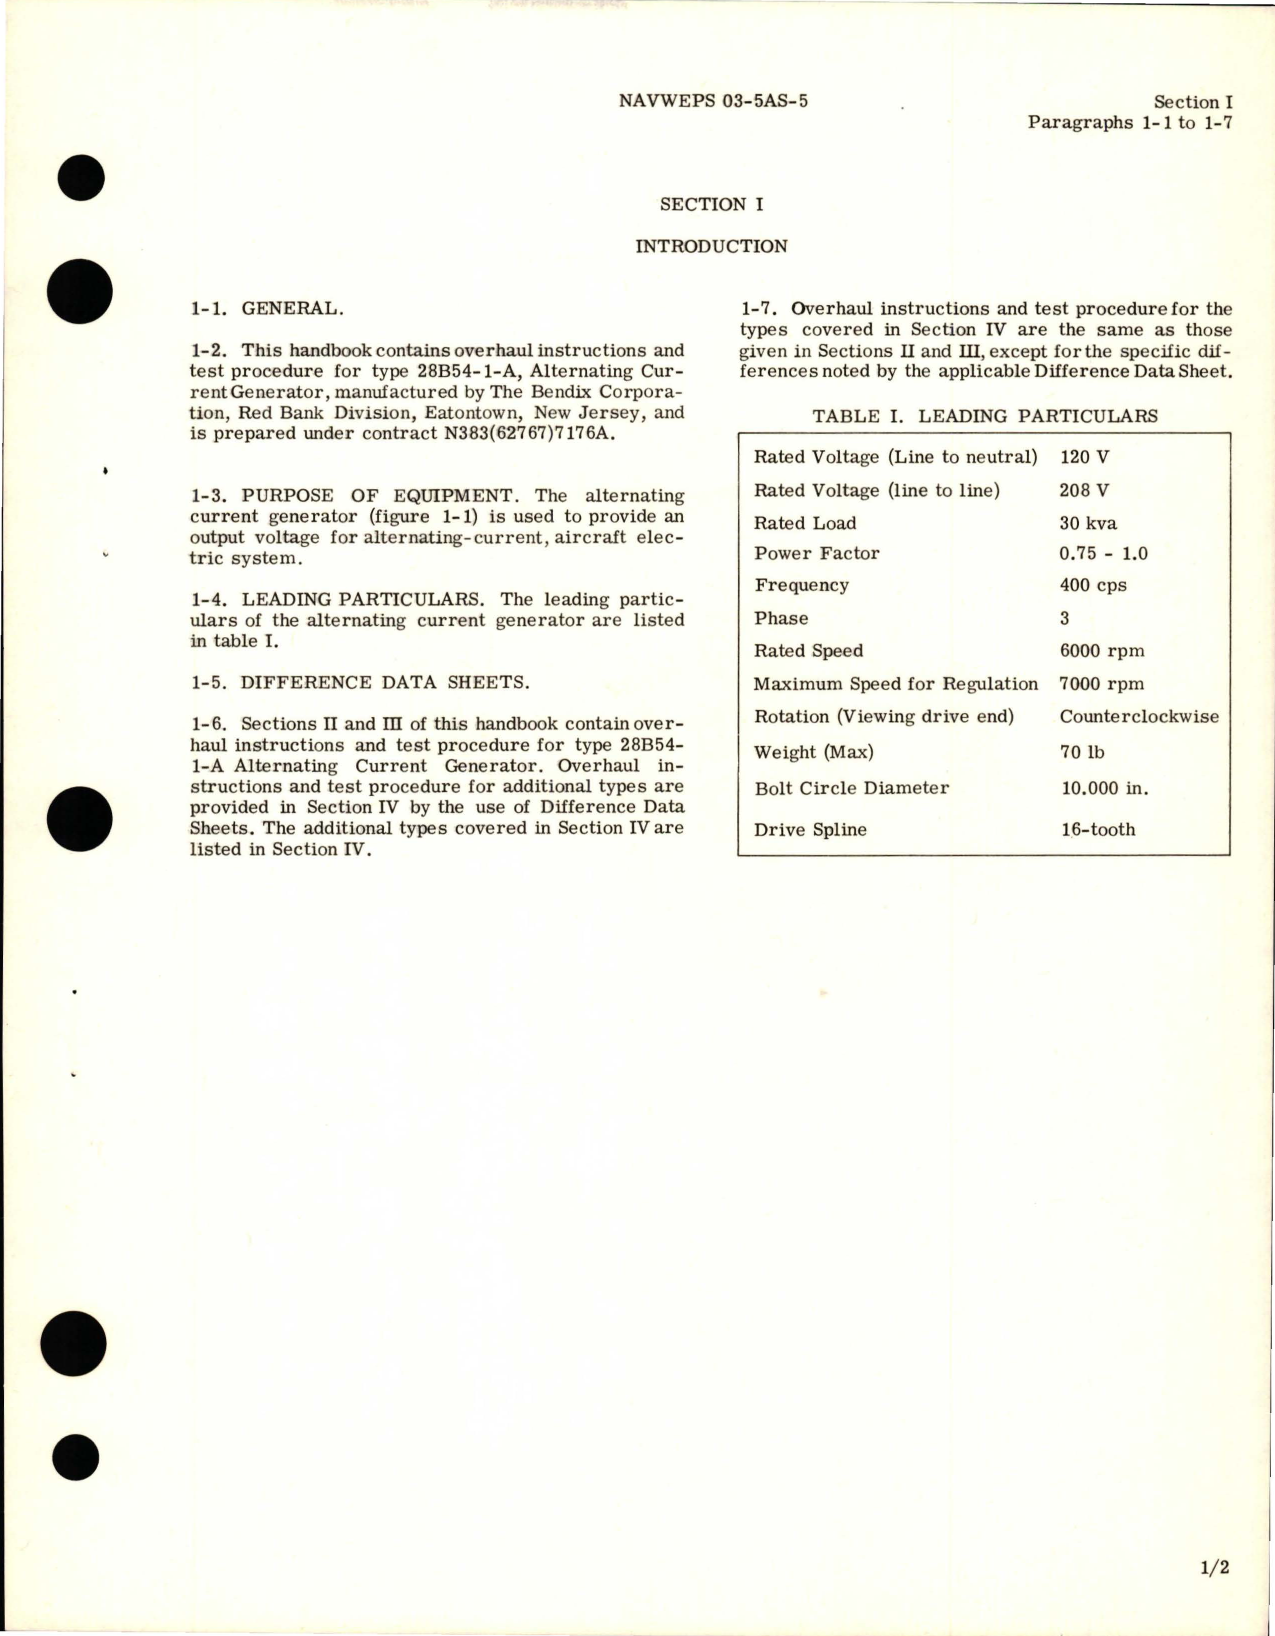 Sample page 5 from AirCorps Library document: Overhaul Instructions for Alternating Current Generator - Types 28B54-1-A and 28B54-9-A 